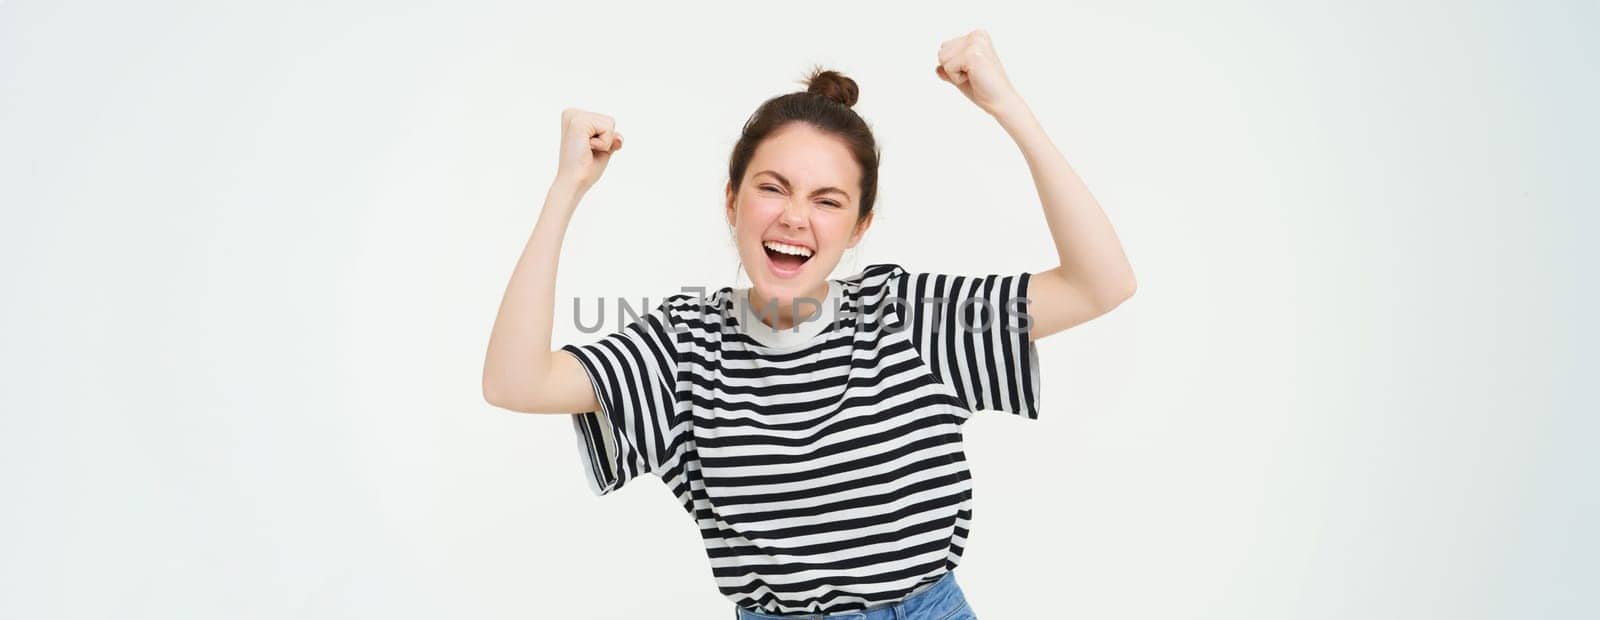 Portrait of happy young sports girl, fan rooting for team, celebrating victory, raising hands up, chanting, triumphing, standing over white background. Copy space